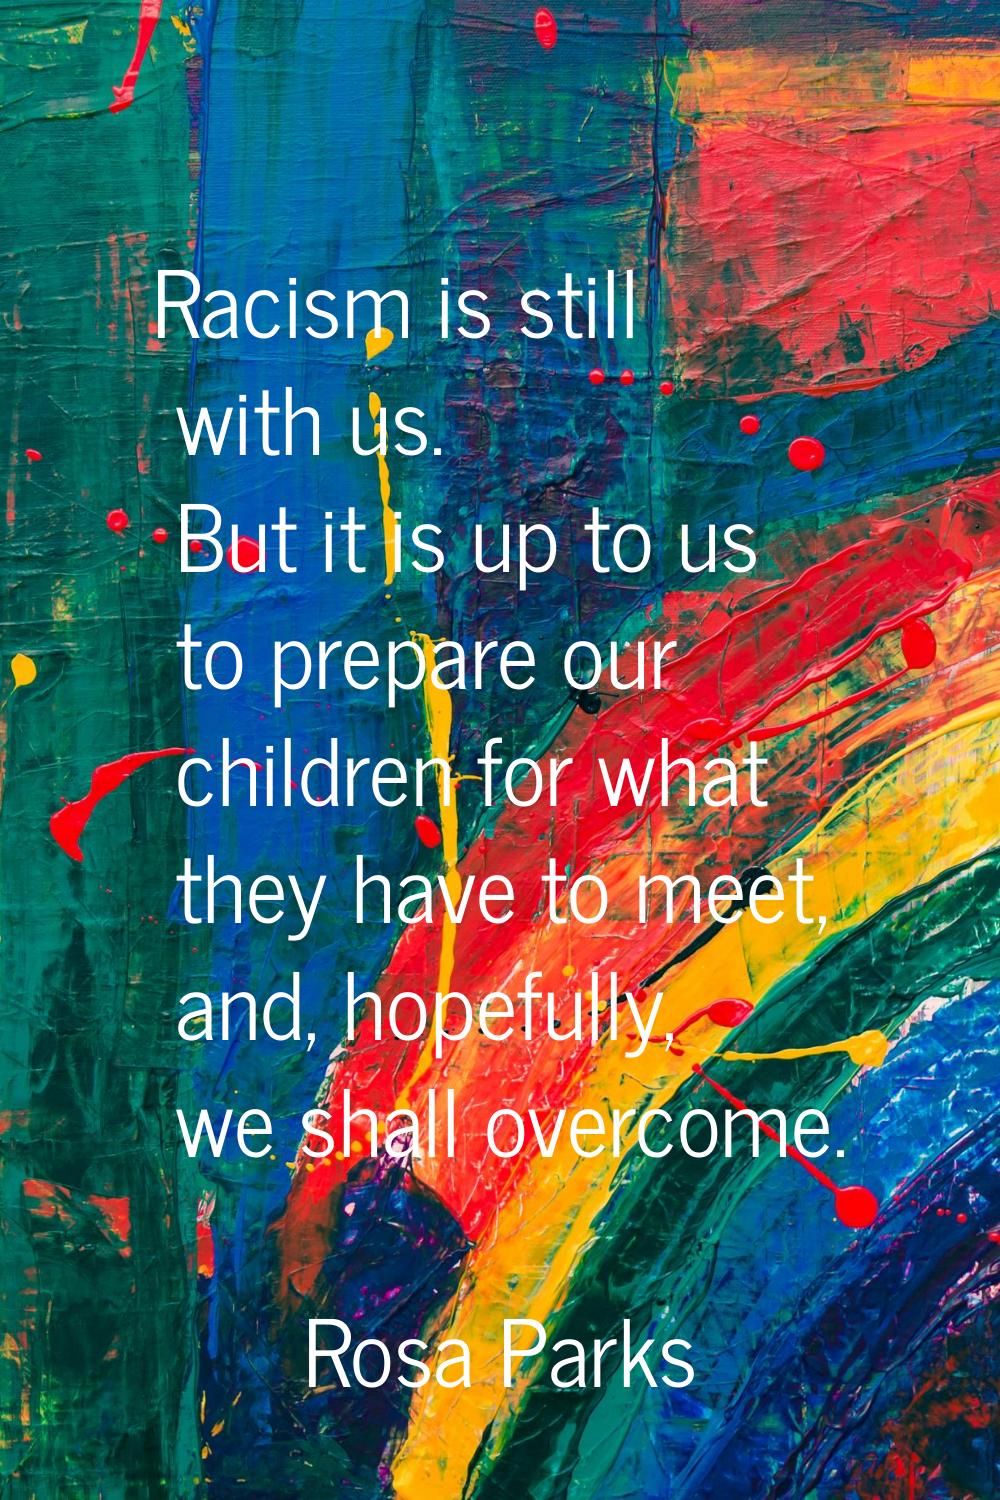 Racism is still with us. But it is up to us to prepare our children for what they have to meet, and